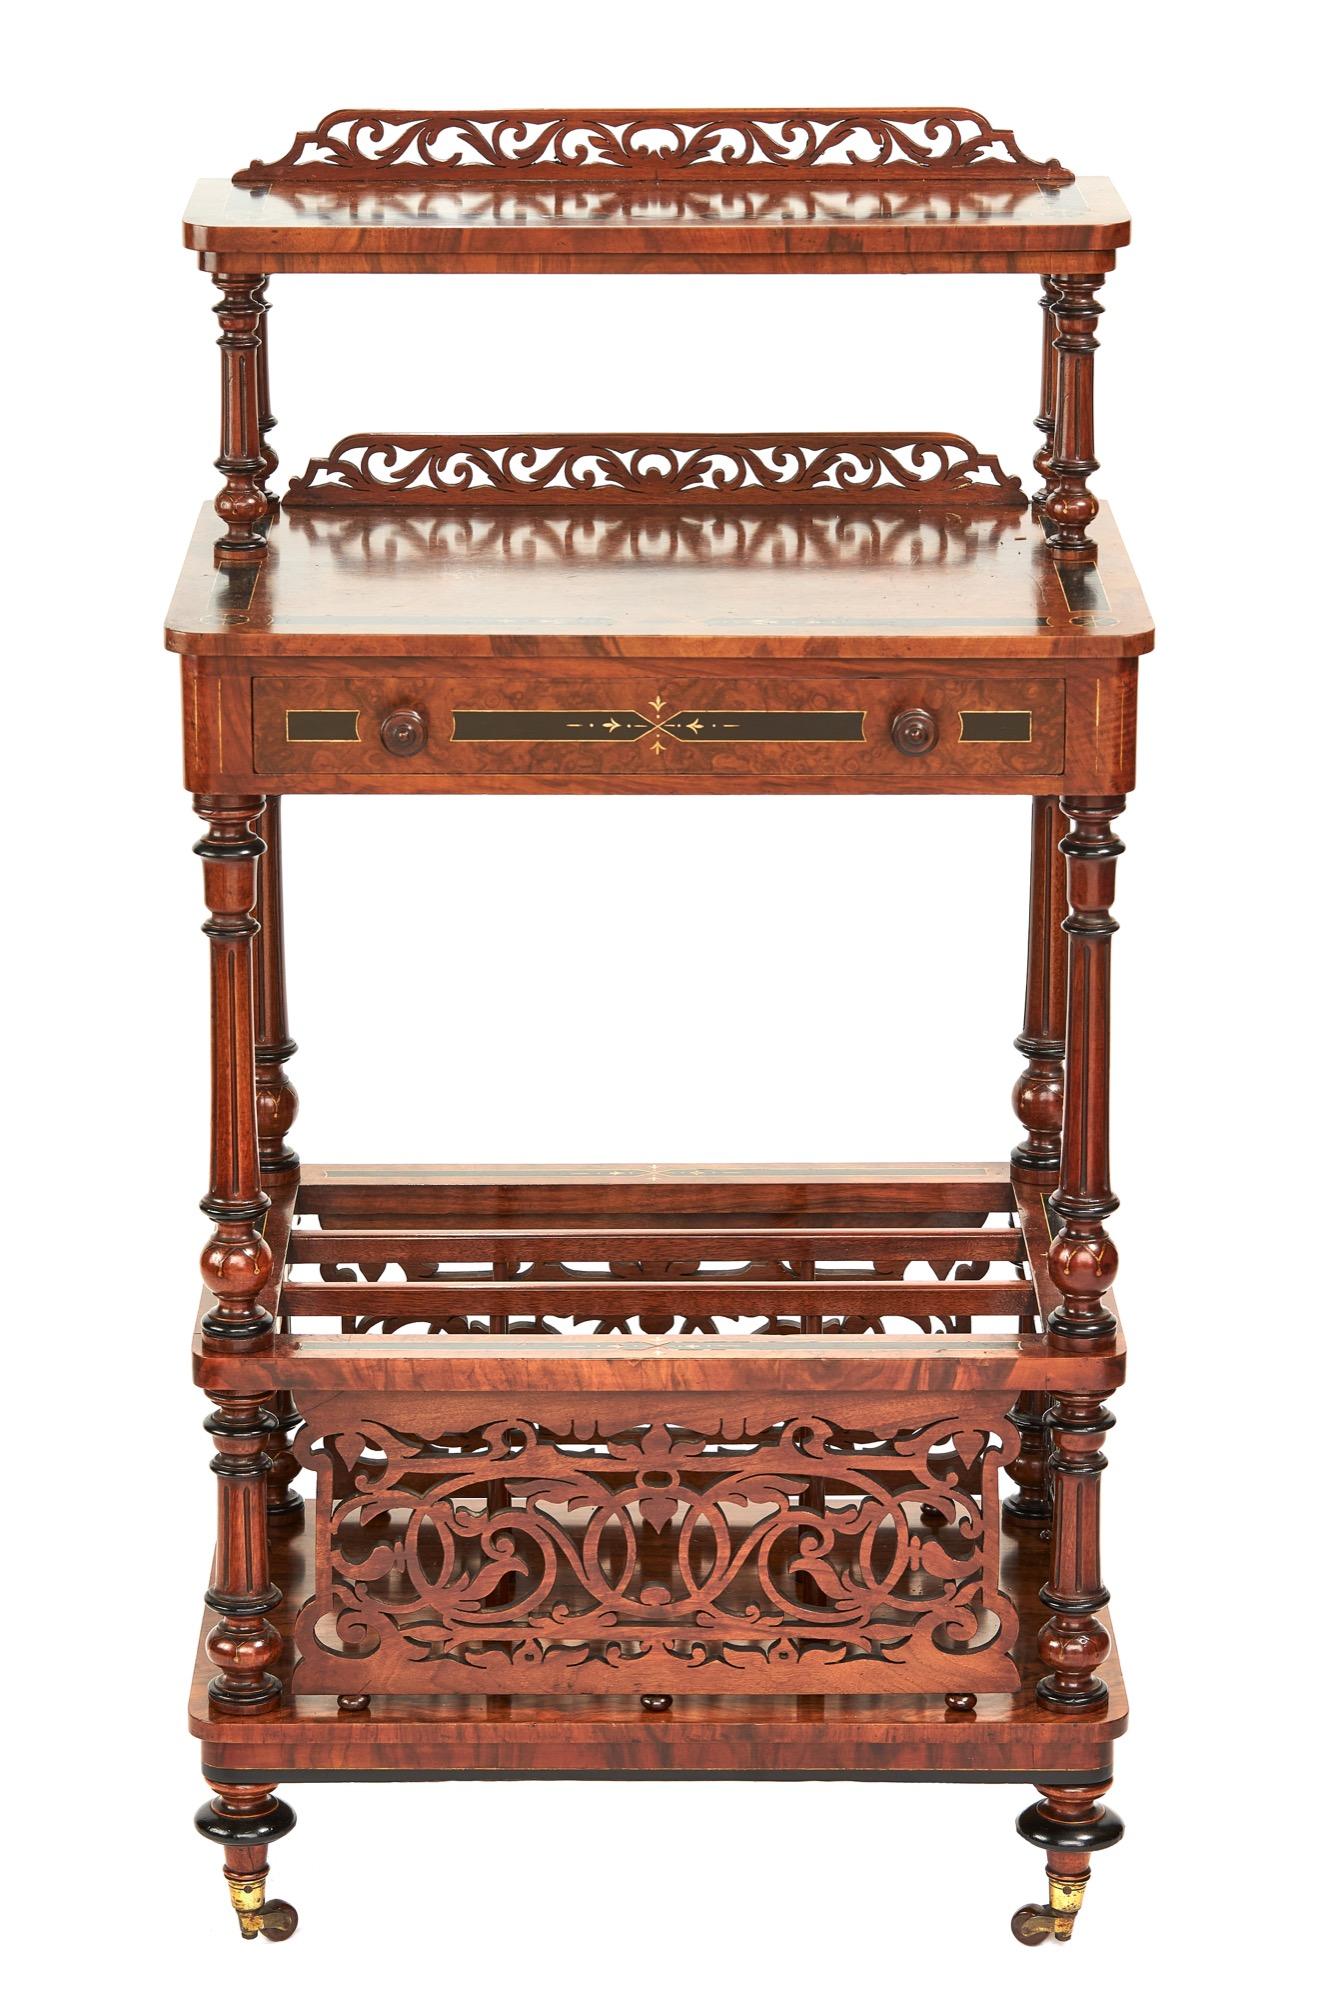 Antique 19th century Victorian burr walnut Canterbury whatnot having magnificent burr walnut veneer and pretty ebony inlay detail throughout, single drawer to the top and an outstanding quality three section fretwork Canterbury below. It is raised